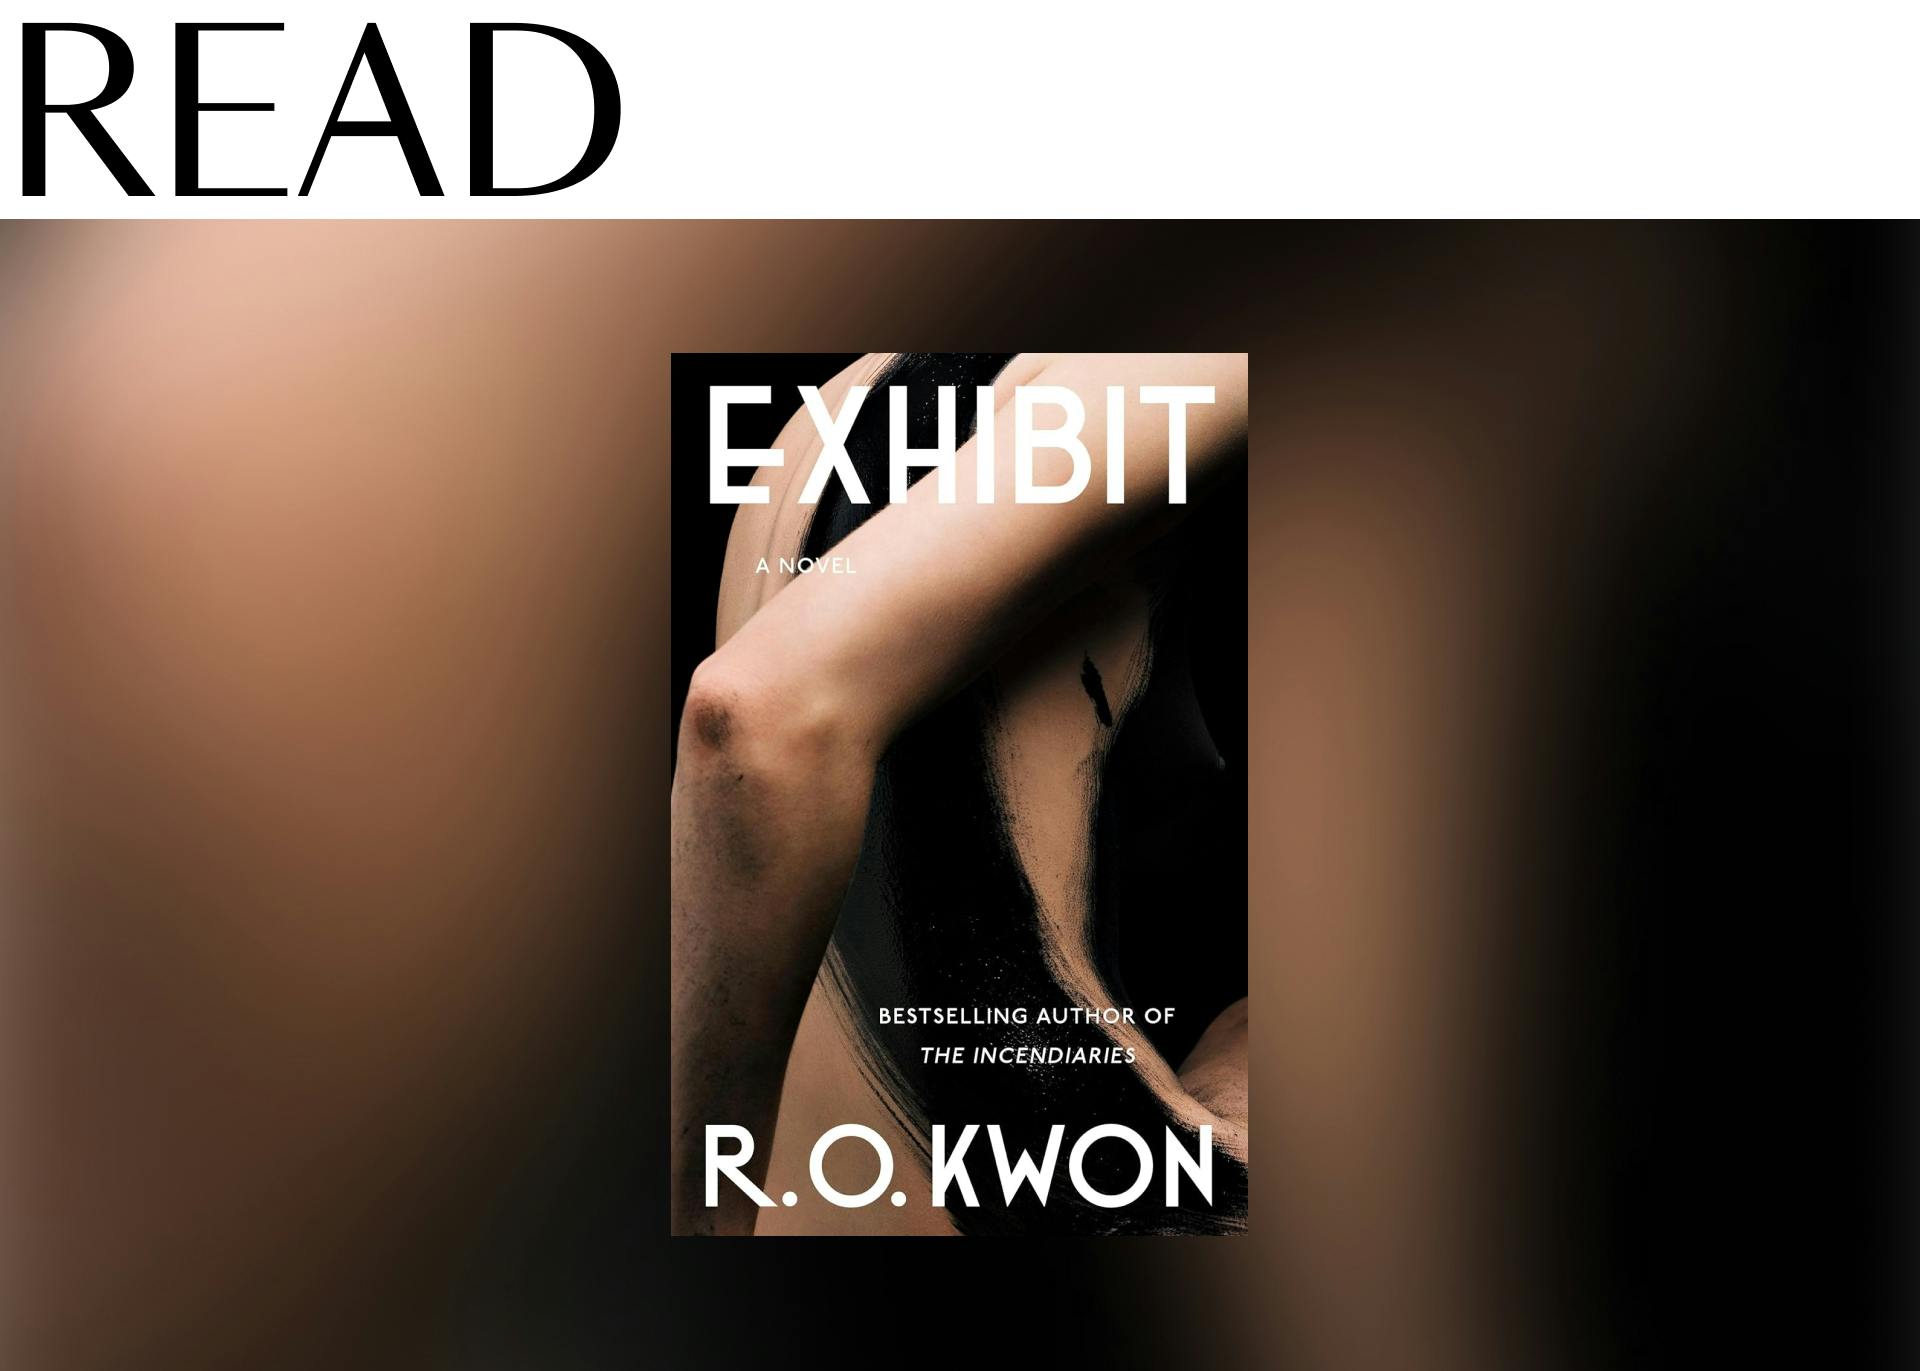 READ: “Exhibit” by R.O. Kwon 